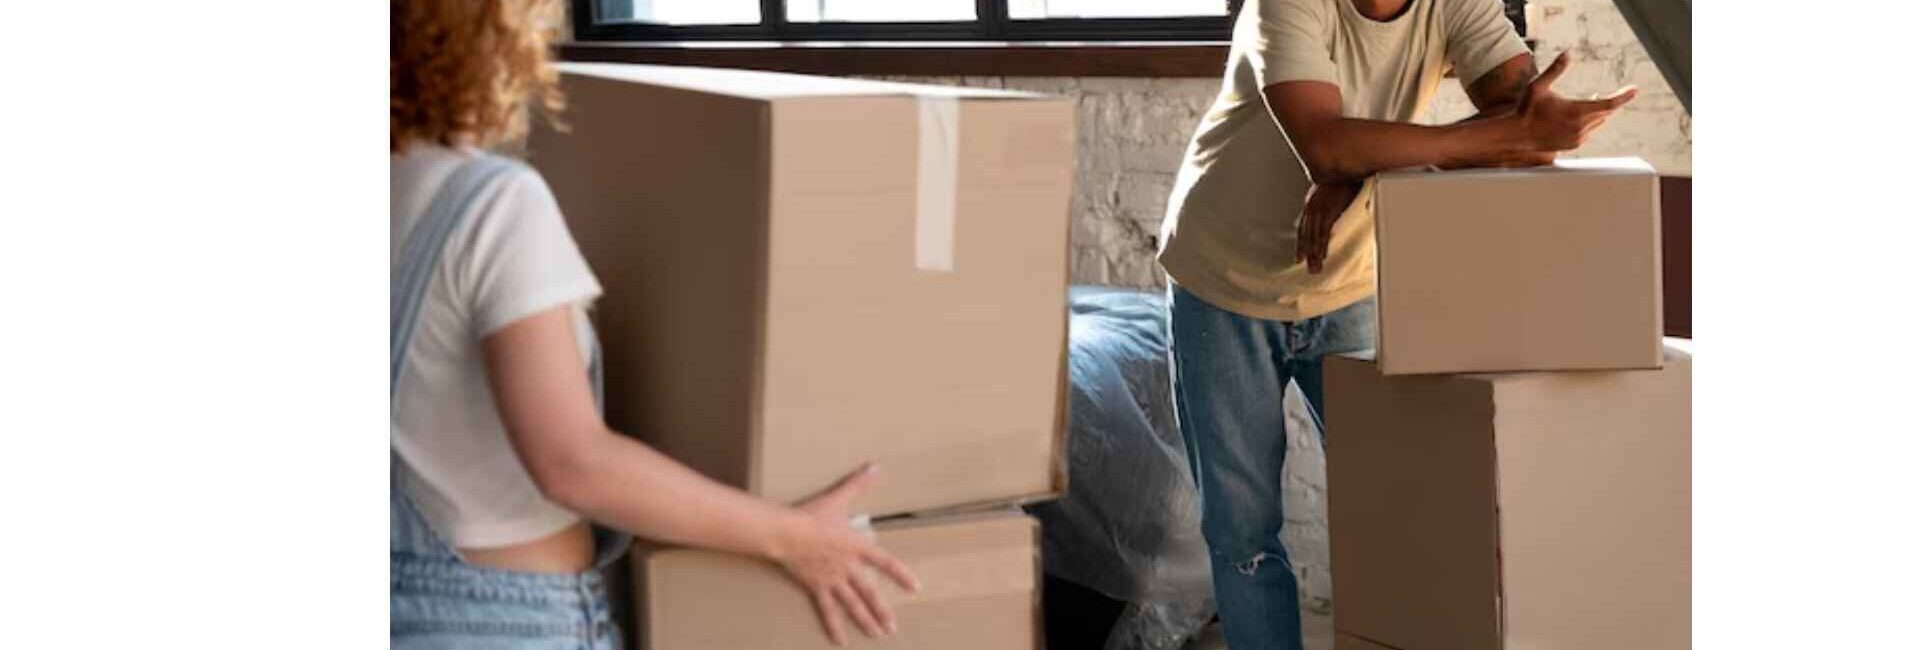 Mahto Packers Movers - Best Packers and Movers in Noida